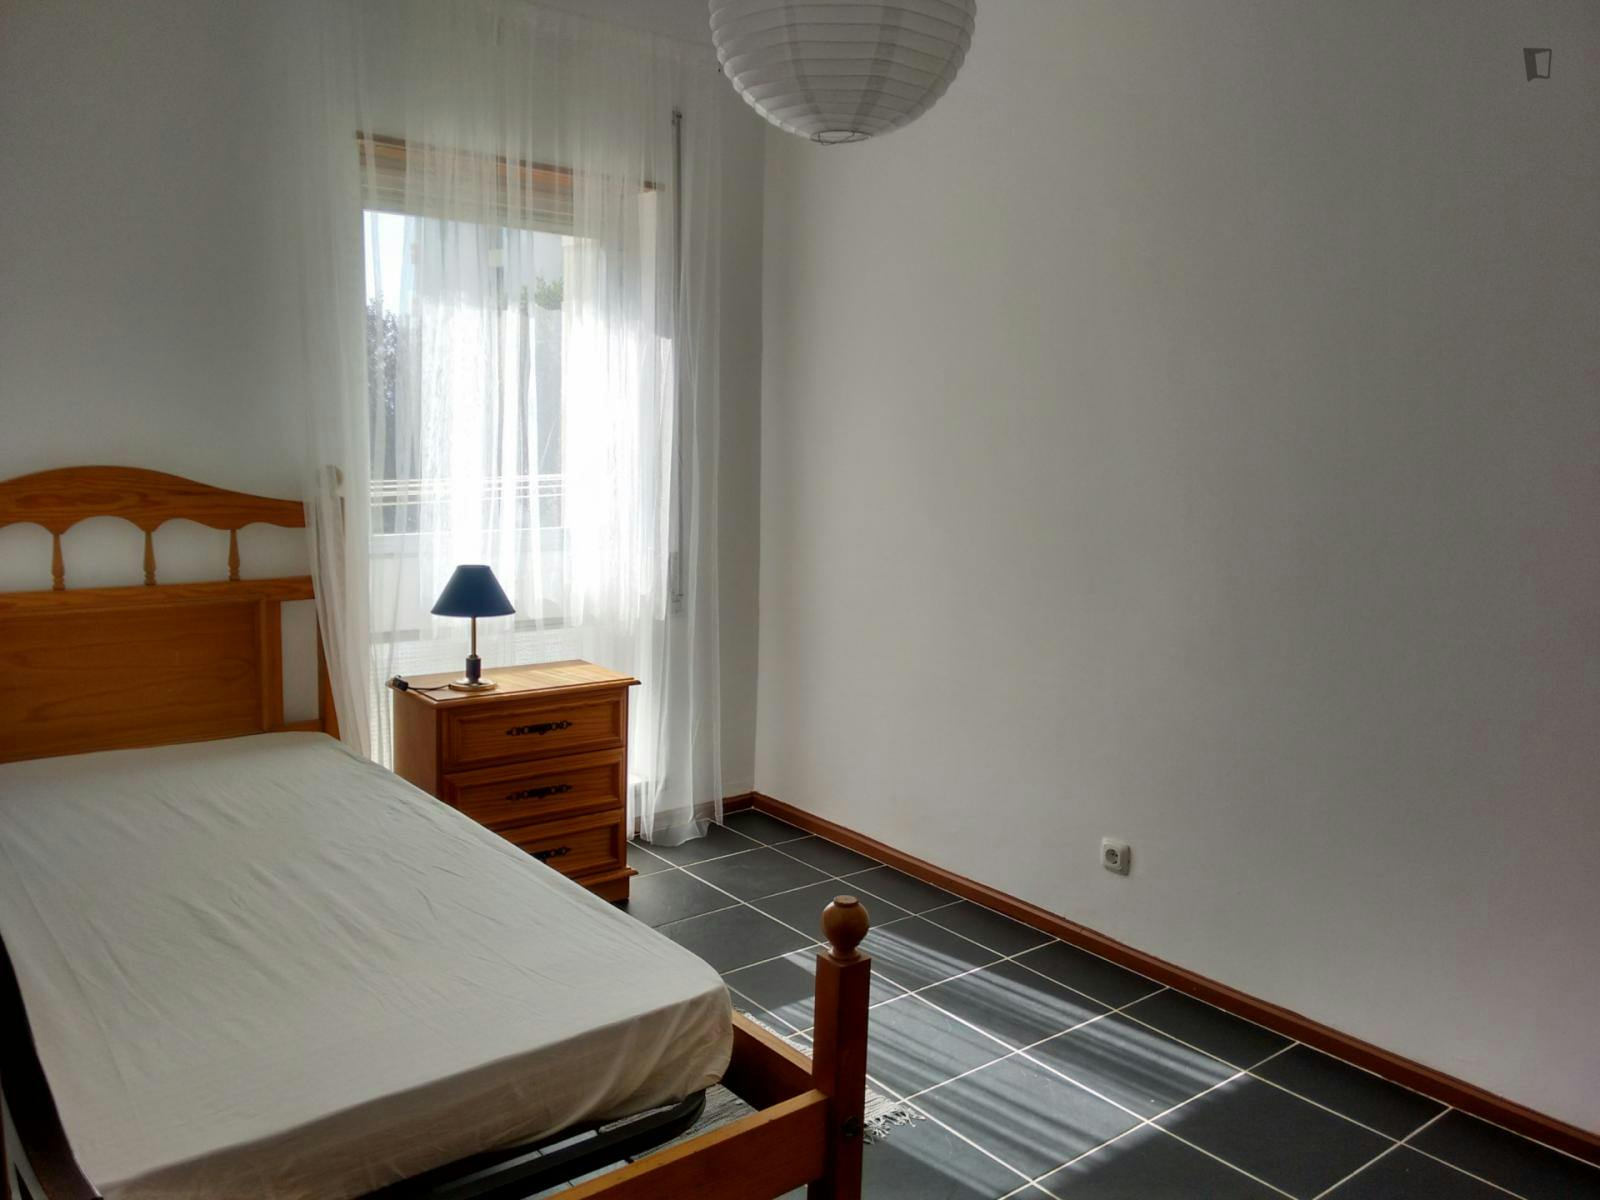 Single room in an apartment next to the hospital in Castelo Branco.